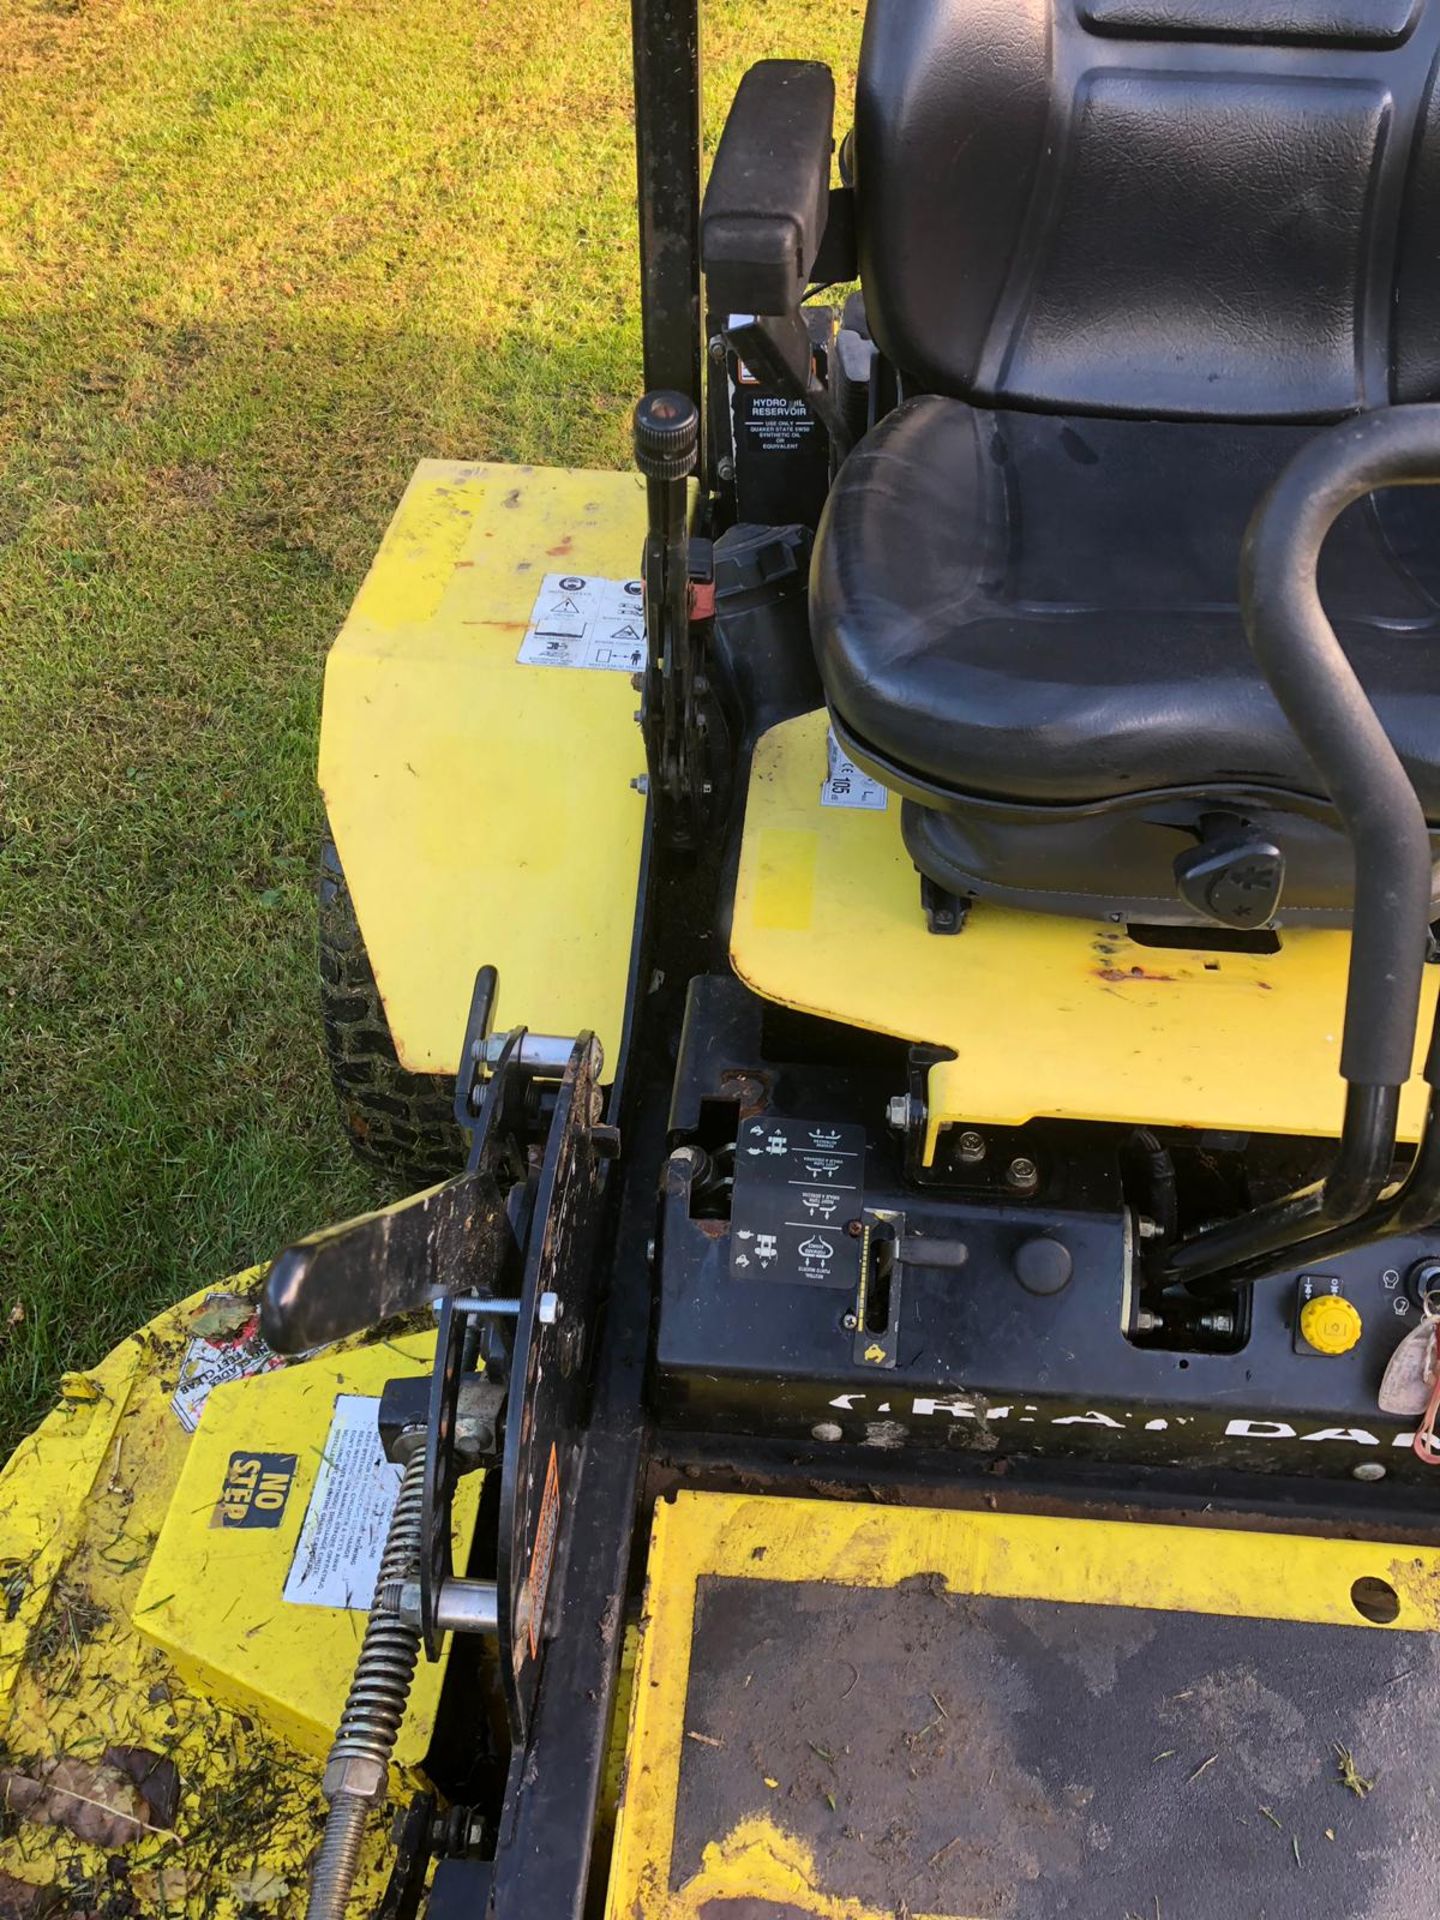 2012/12 REG GREAT DANE BRUTUS RIDE ON PETROL LAWN MOWER WITH DELUXE SEAT AND ROLL BAR *PLUS VAT* - Image 9 of 16